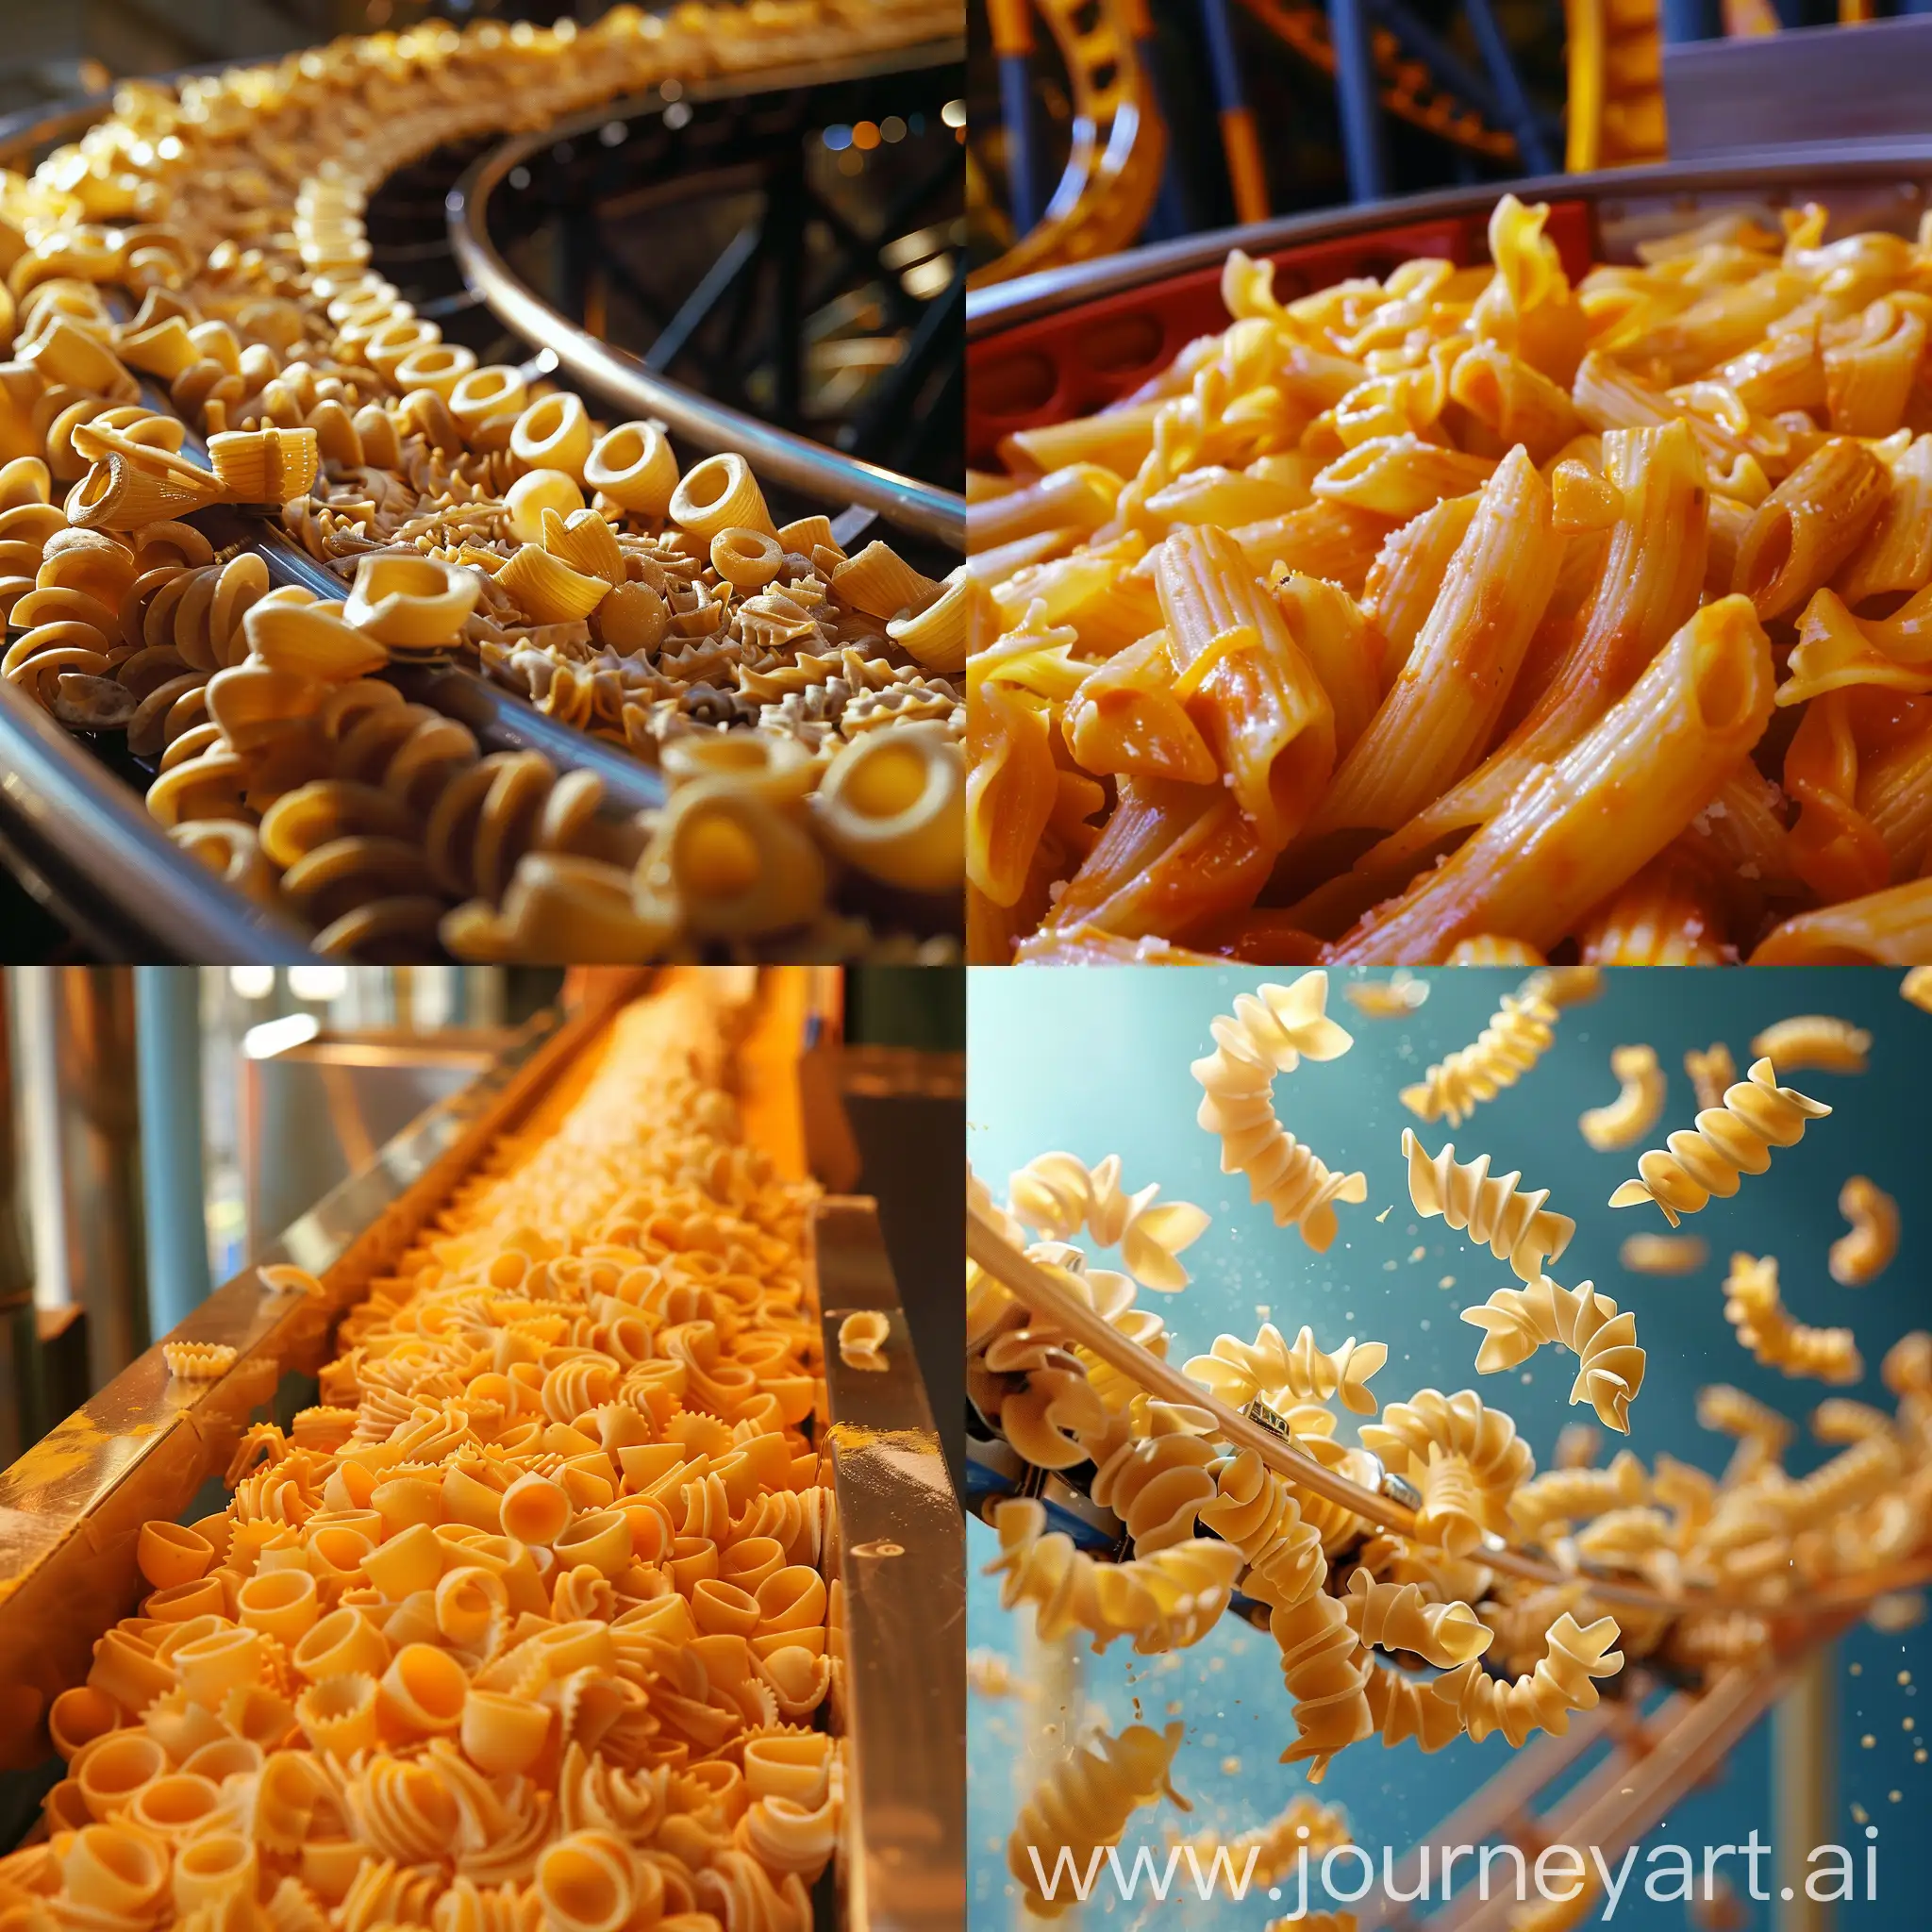 Thrilling-Roller-Coaster-Ride-with-Pasta-Delight-at-Wiener-Prater